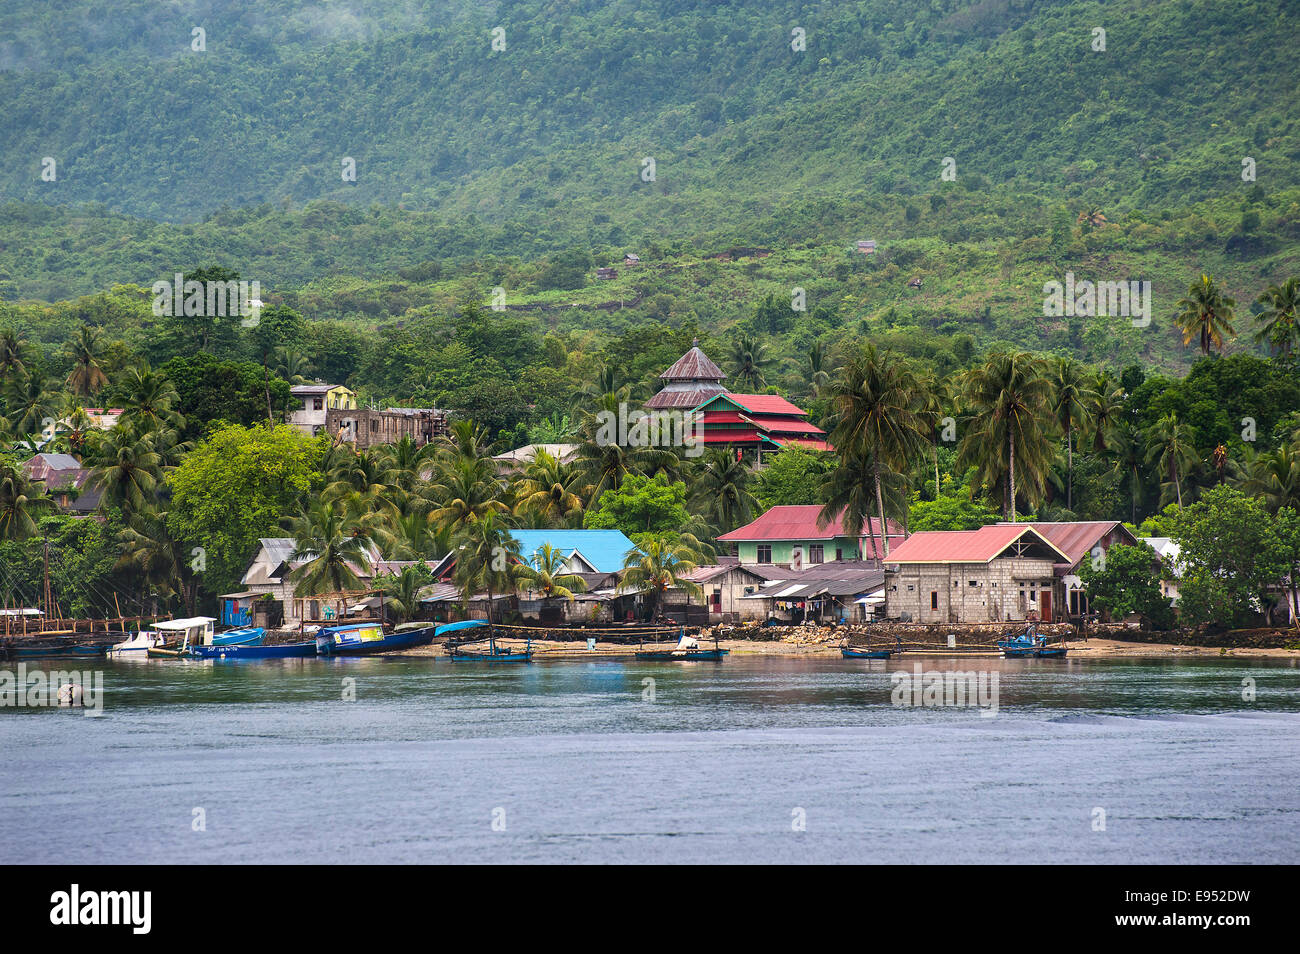 Boats and village after tropical rainfall, Tomea Island, Sulawesi, Indonesia Stock Photo